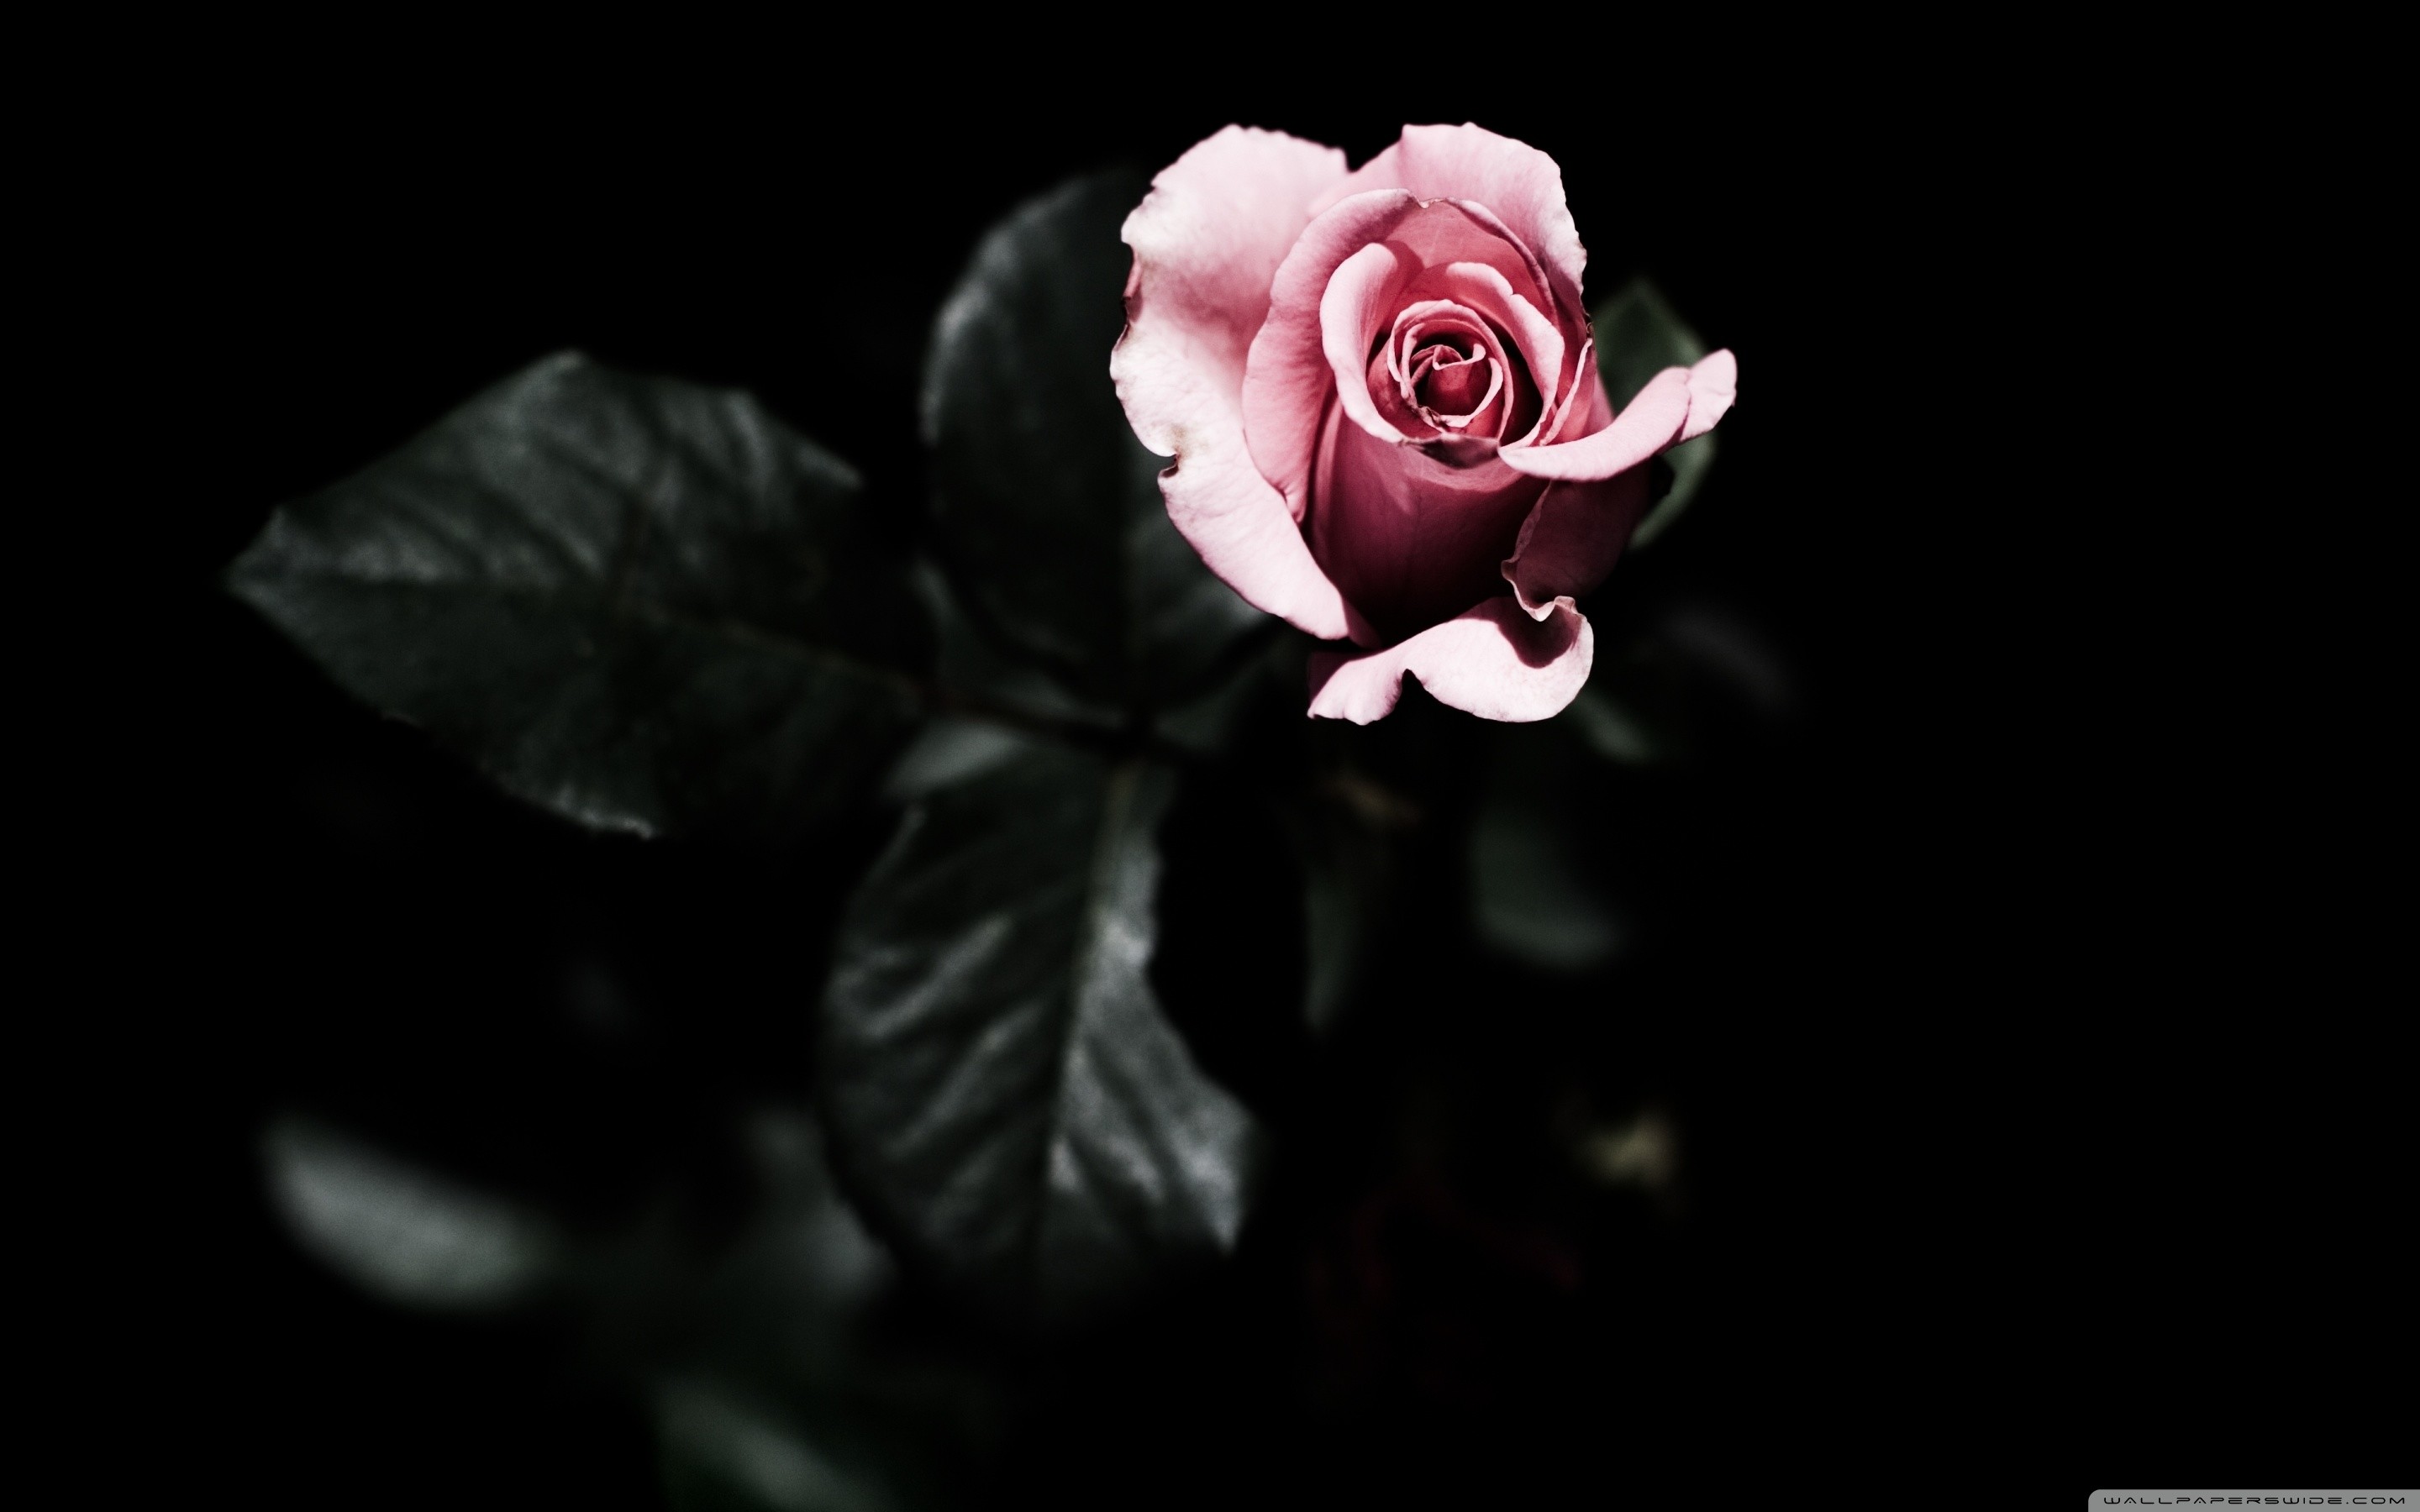 Black Rose wallpaper from Gothic wallpapers SCARLET Pinterest